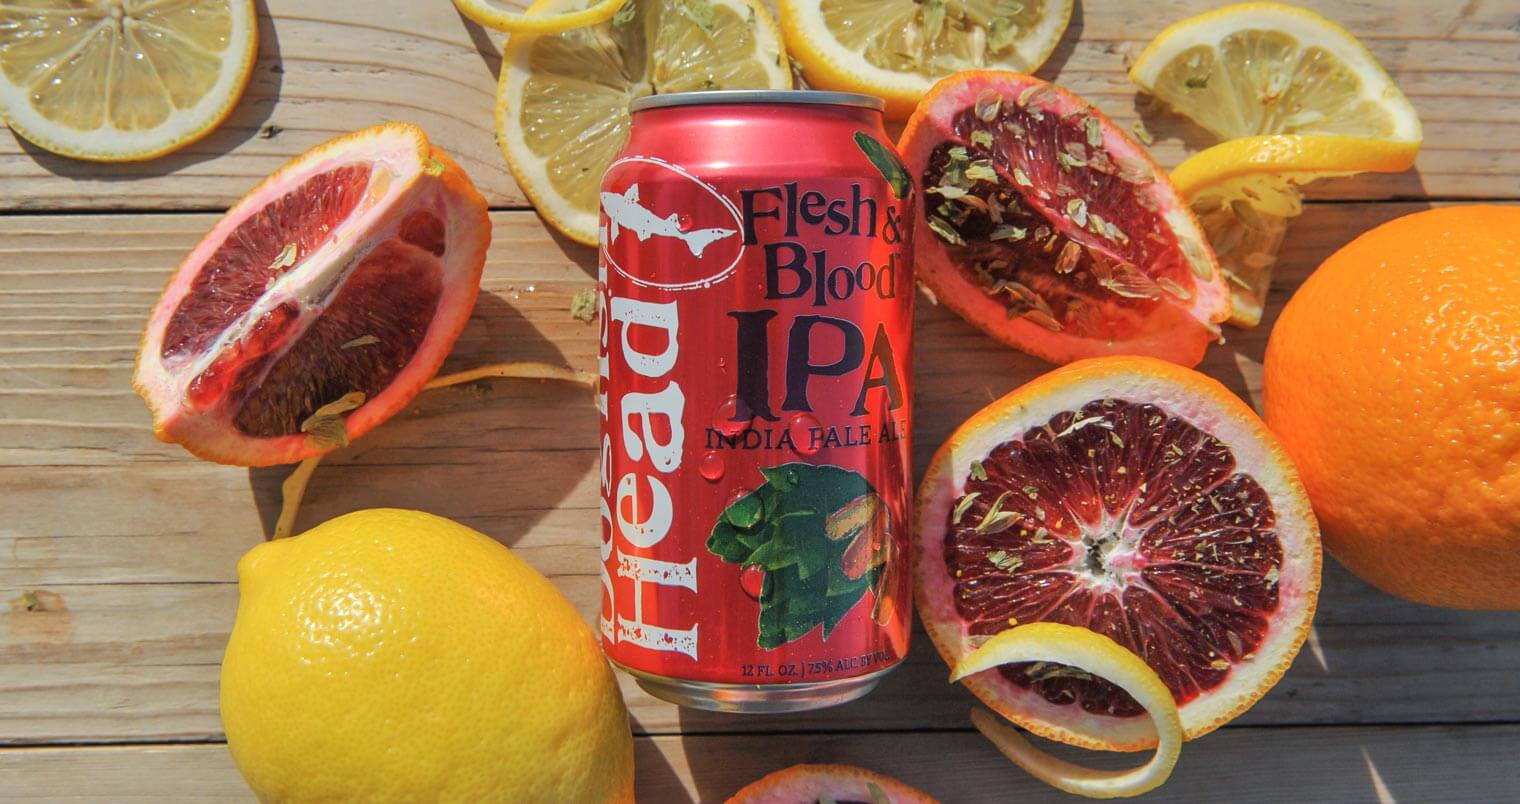 Dogfish Head Releases Flesh & Blood IPA in Cans, featured image